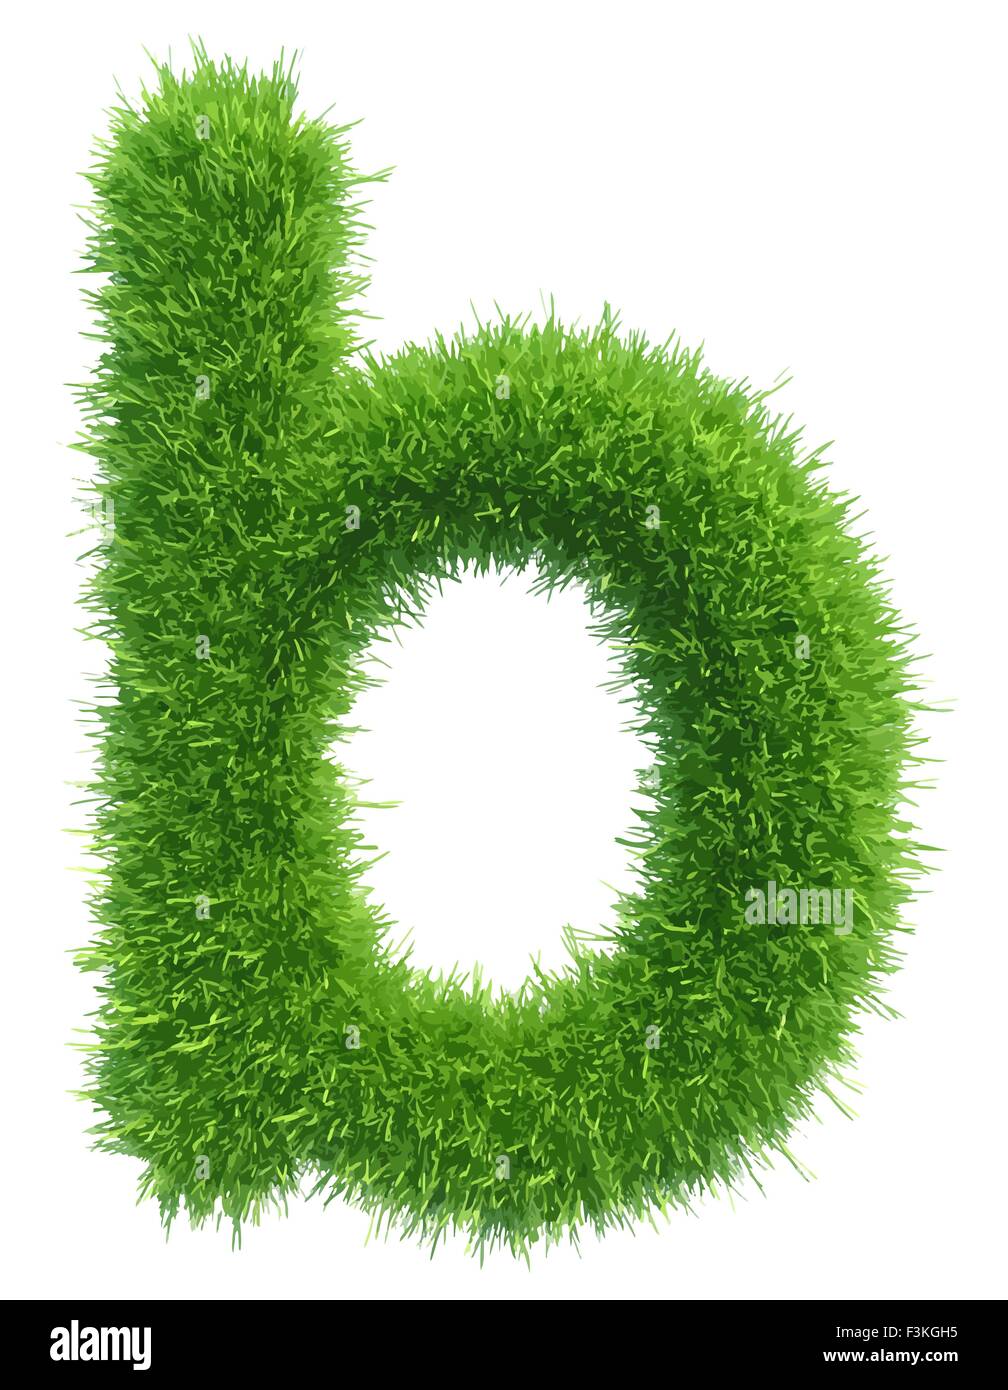 Vector small grass letter b on white background Stock Vector